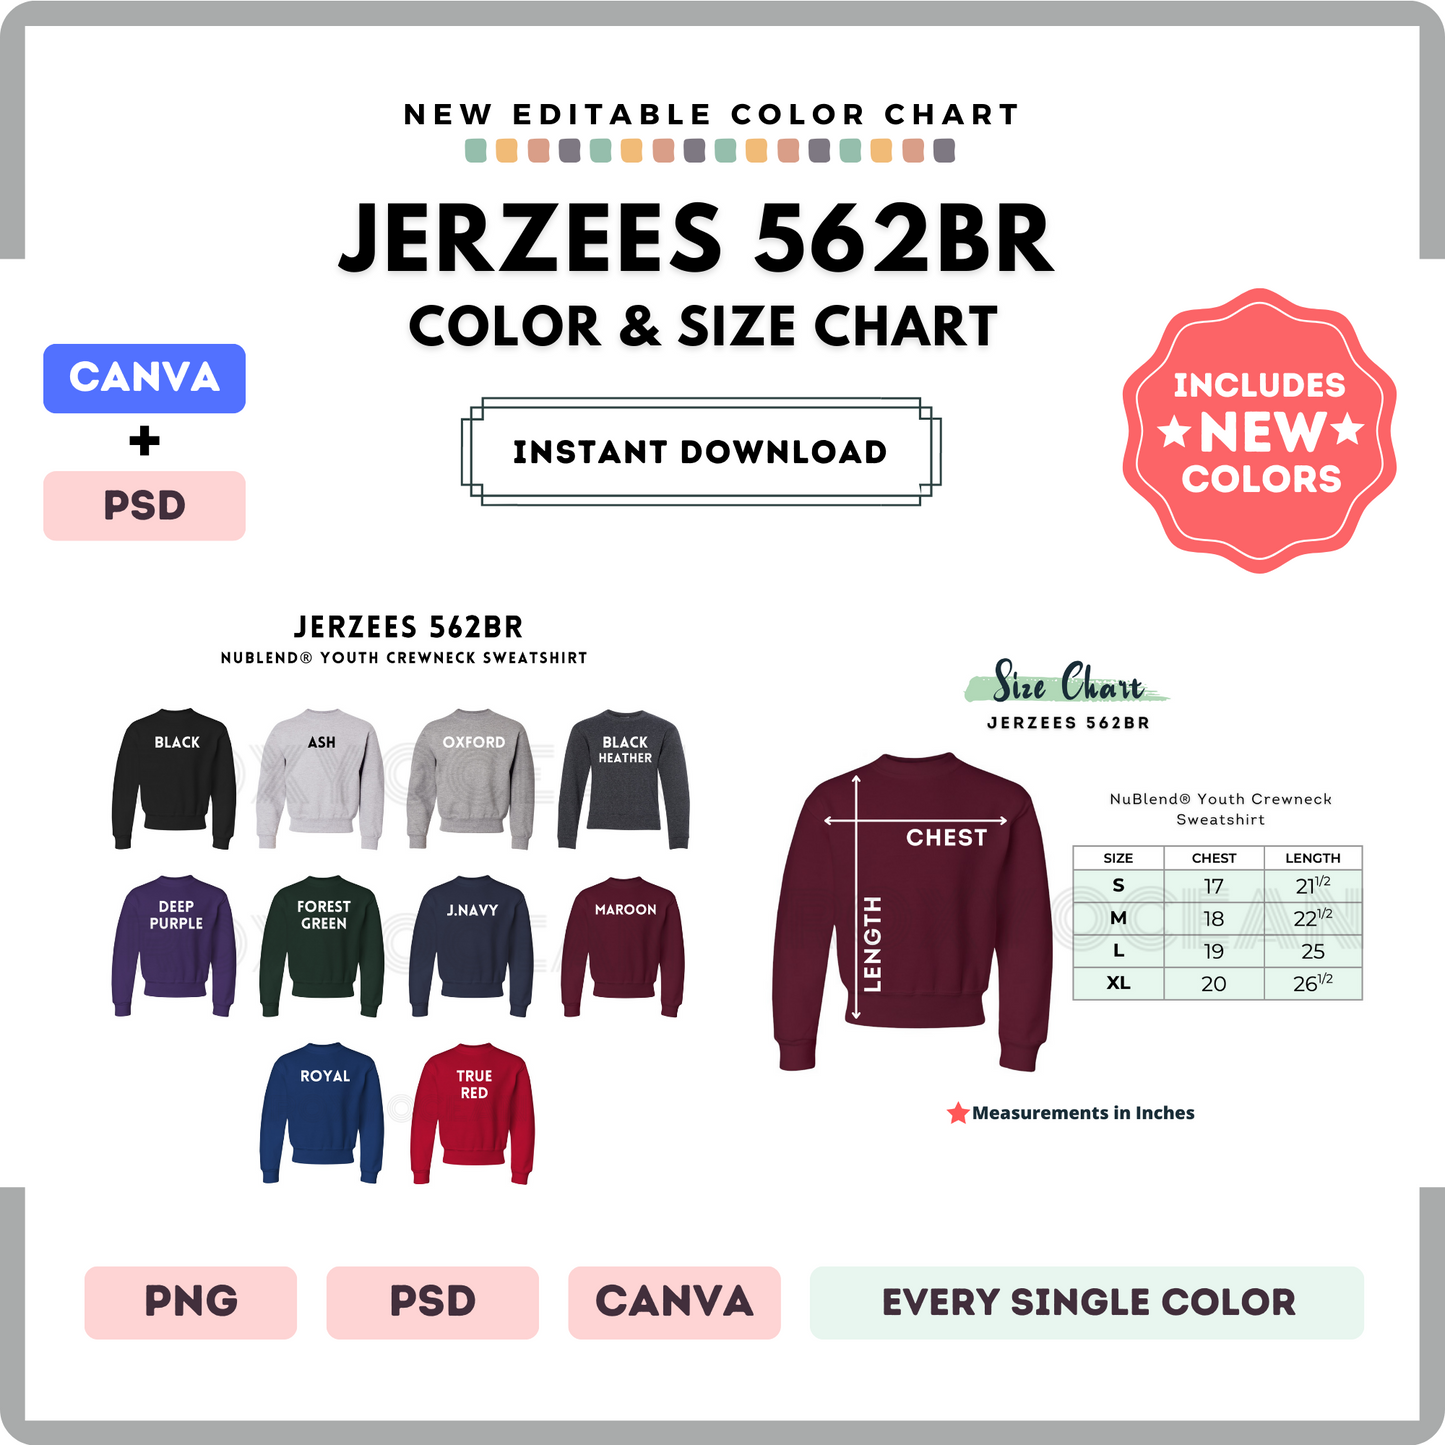 Jerzees 562BR Color and Size Chart